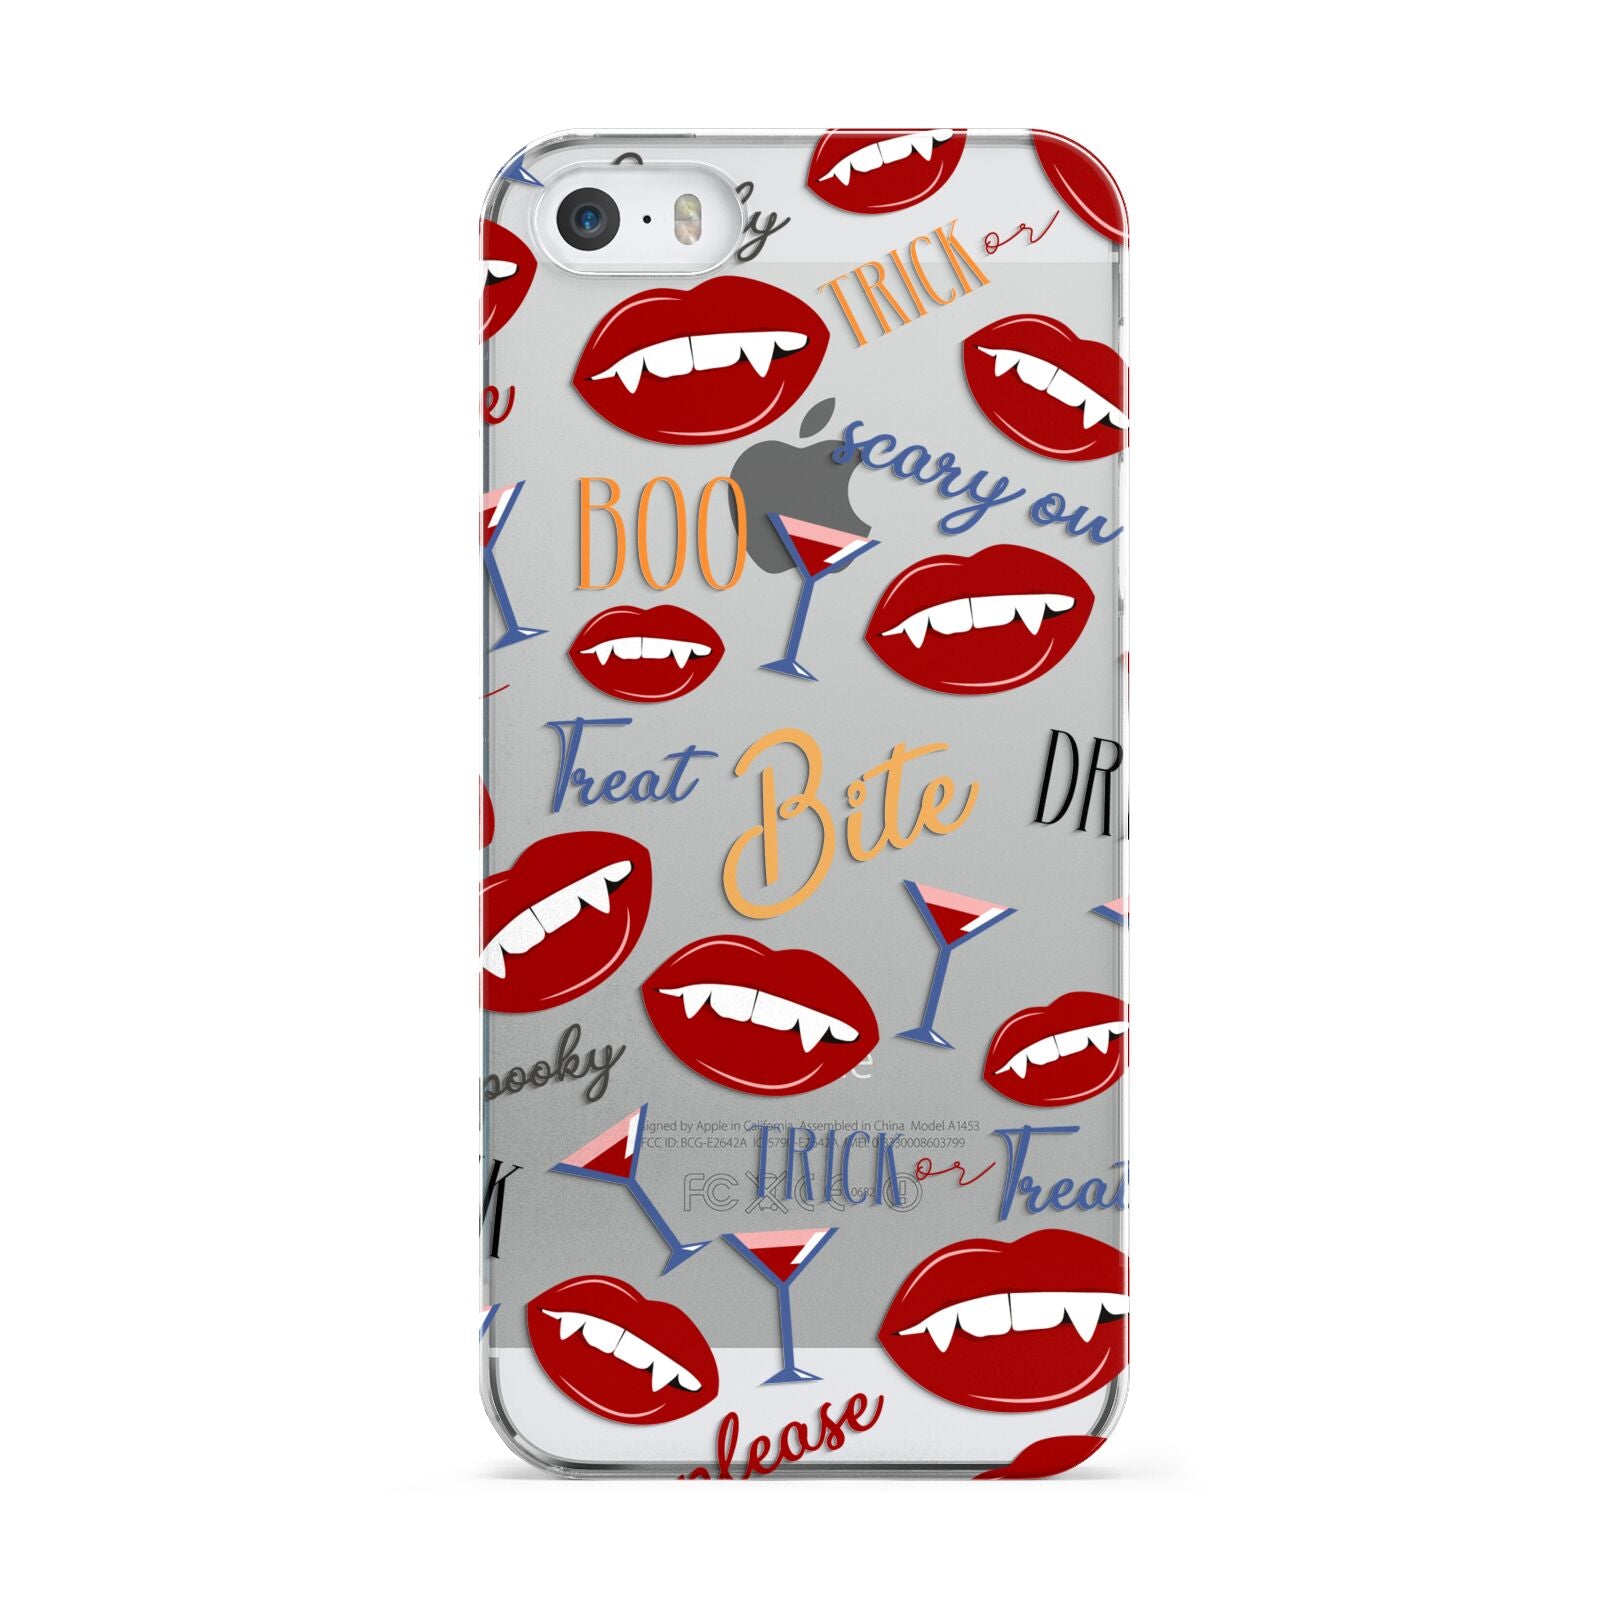 Vampire Illustrations and Catchphrases Apple iPhone 5 Case